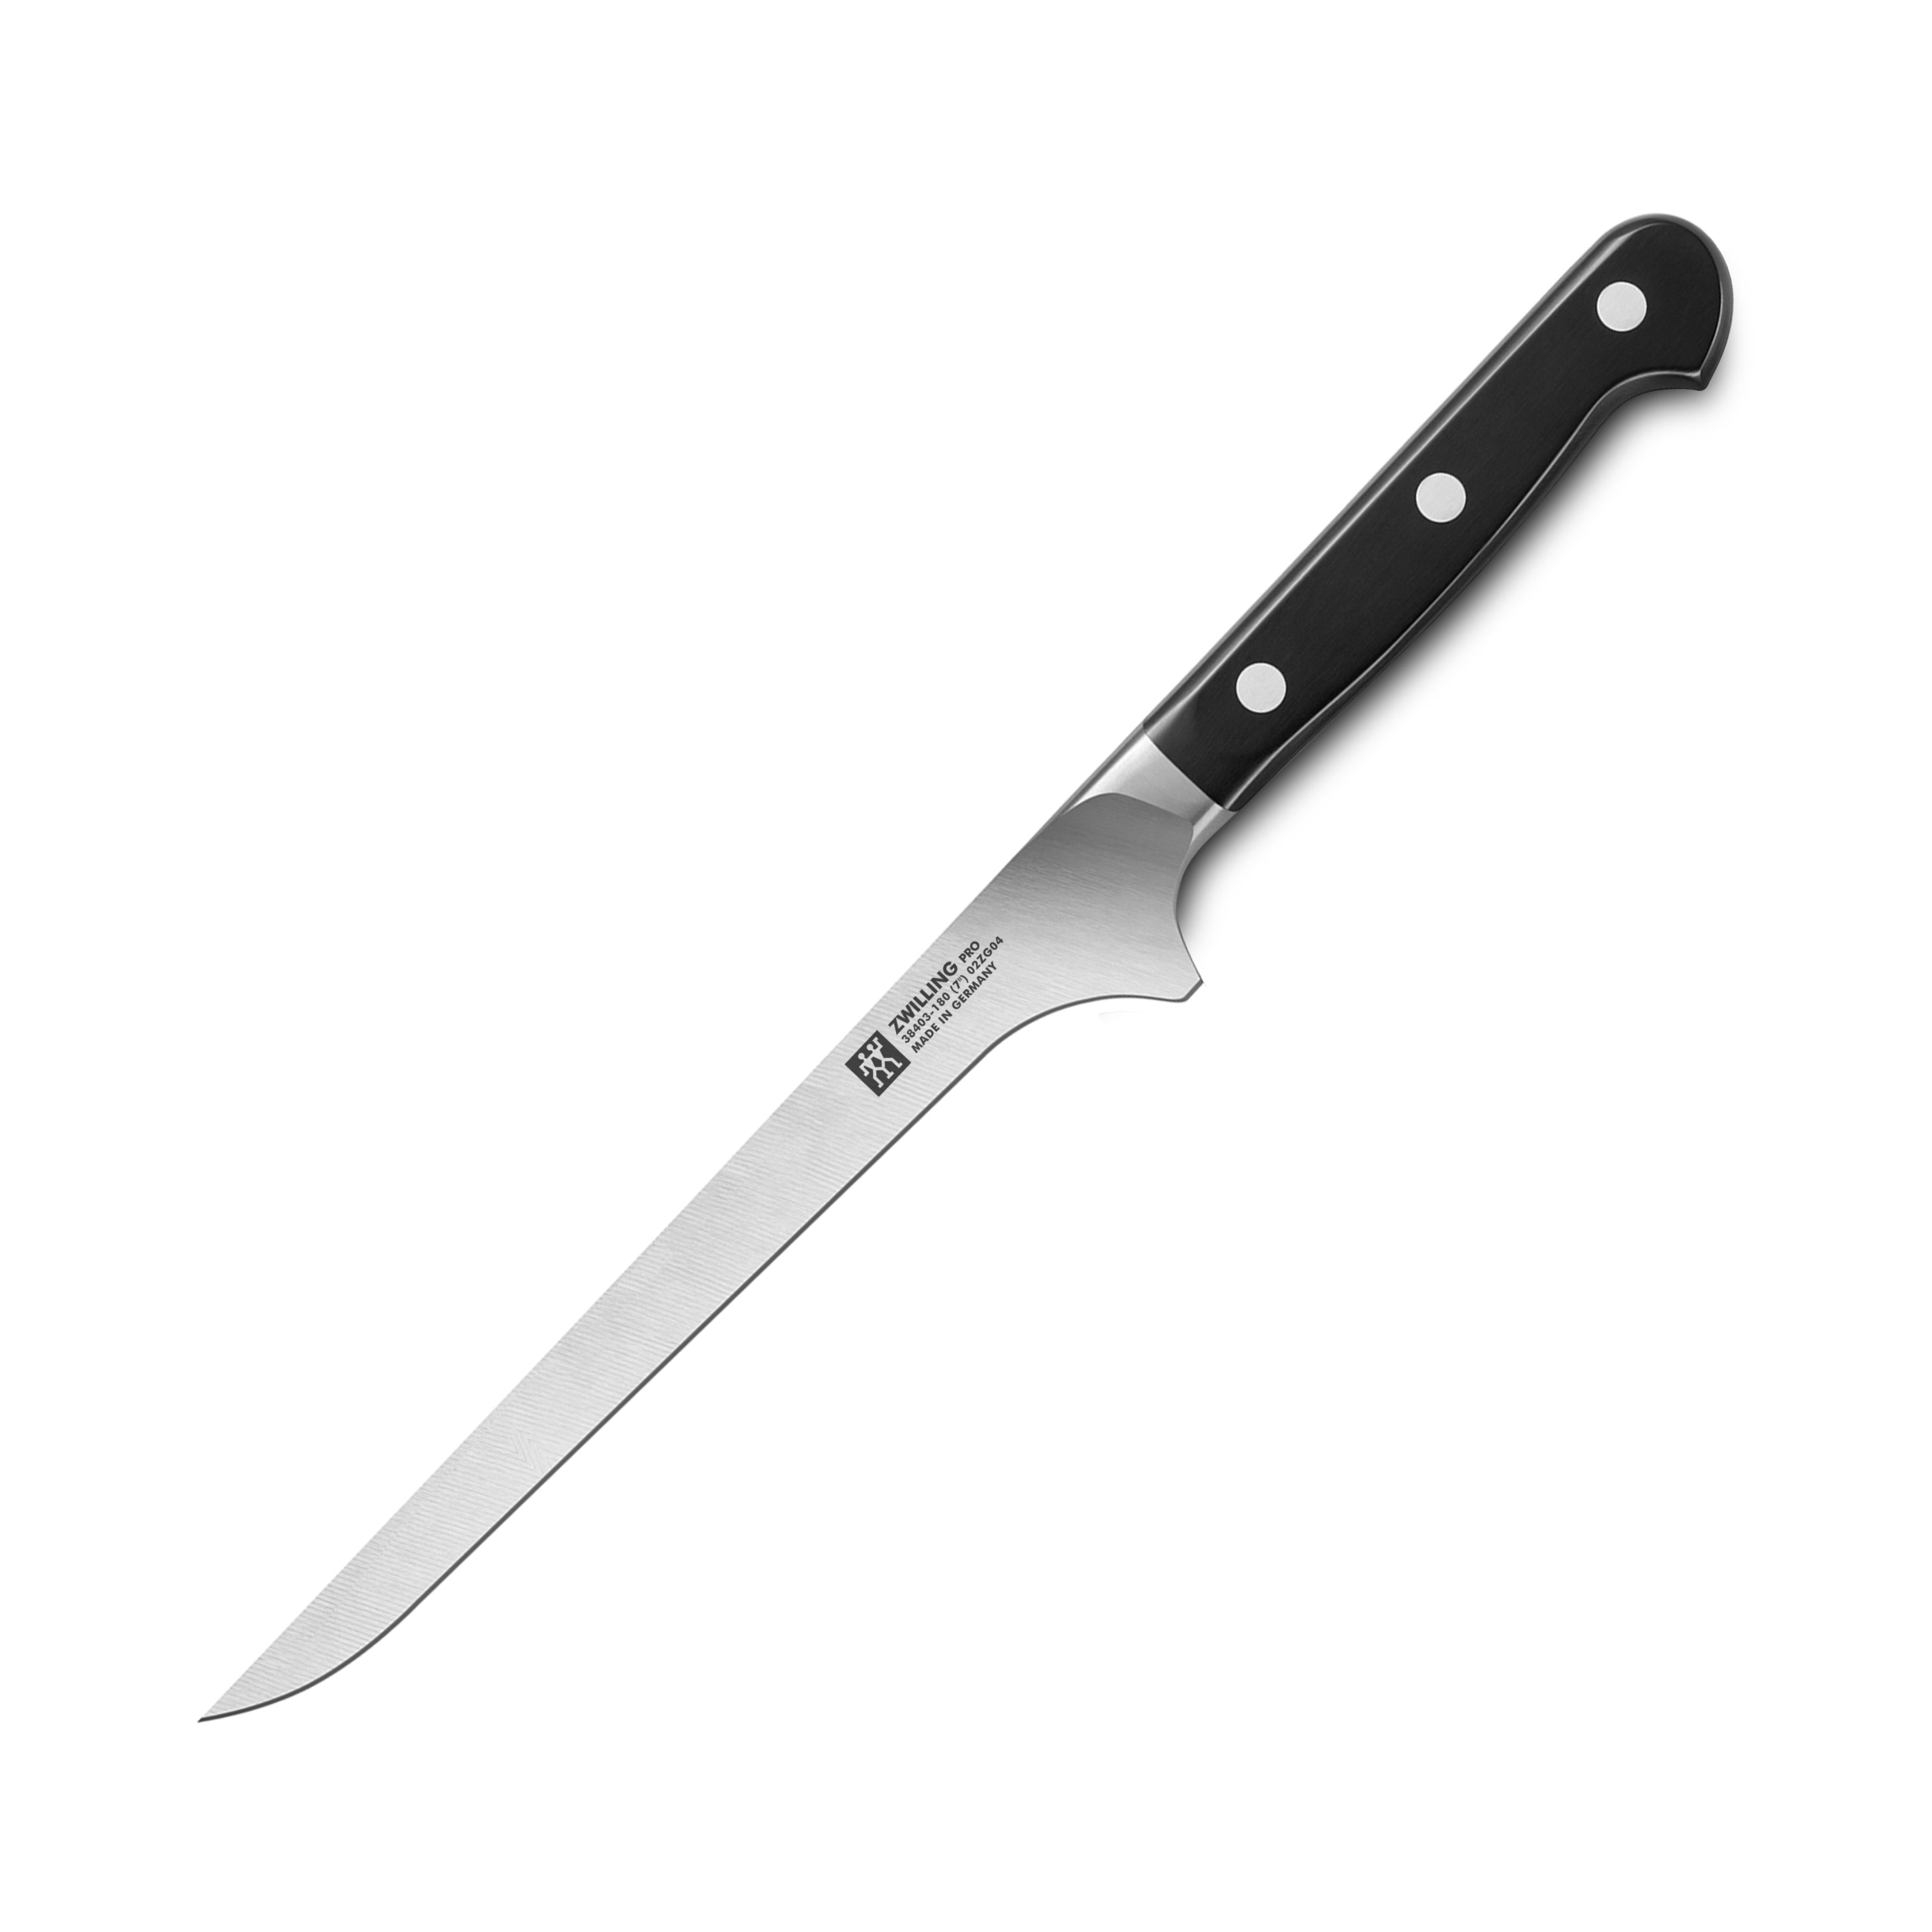 What is the difference between a boning knife and fillet knife